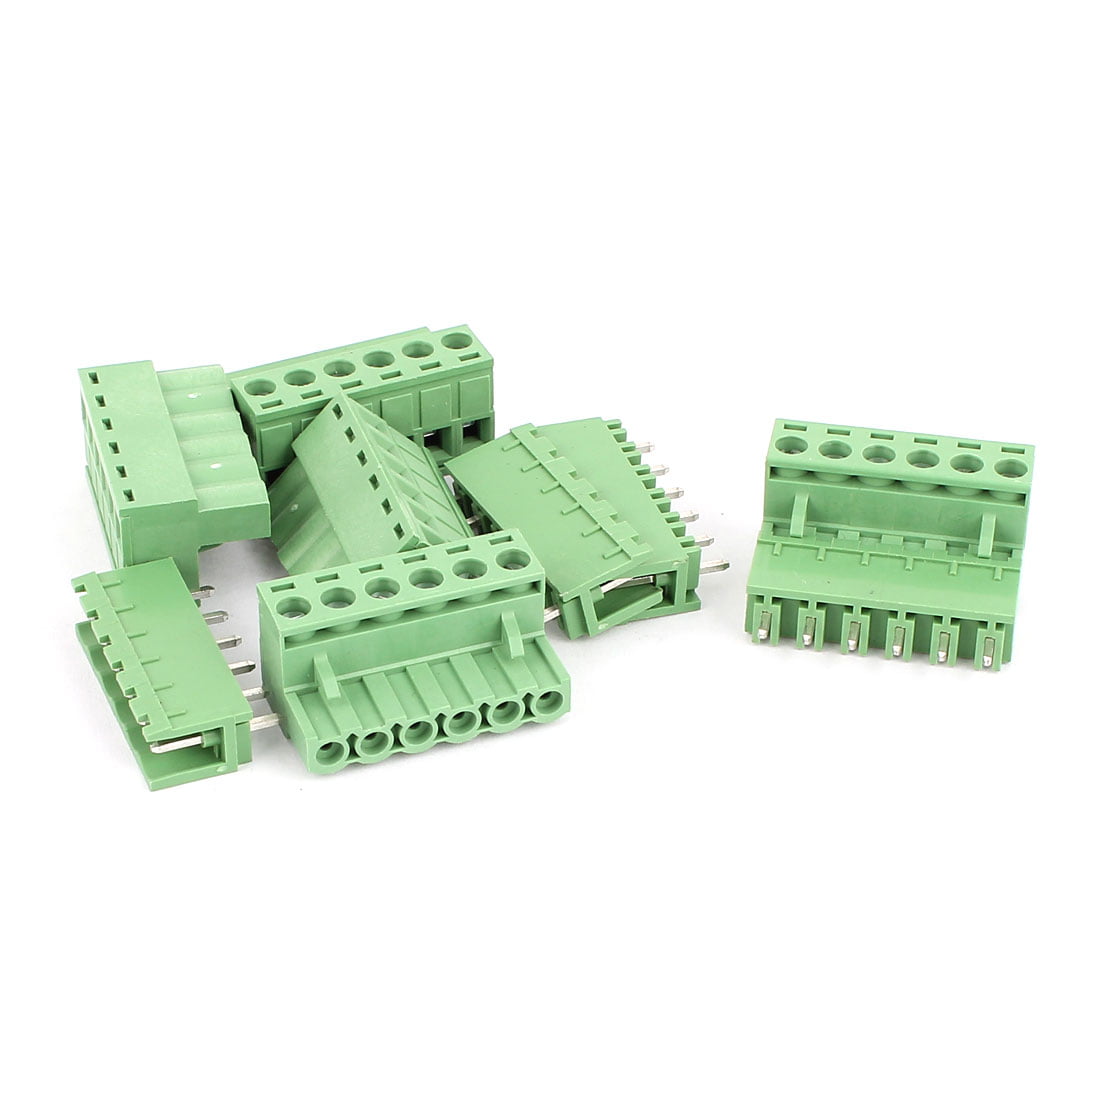 Aexit 5 Set Audio & Video Accessories 6 Pin 5.08mm Screw Pluggable Terminal Block Green Connectors & Adapters 300V 10A